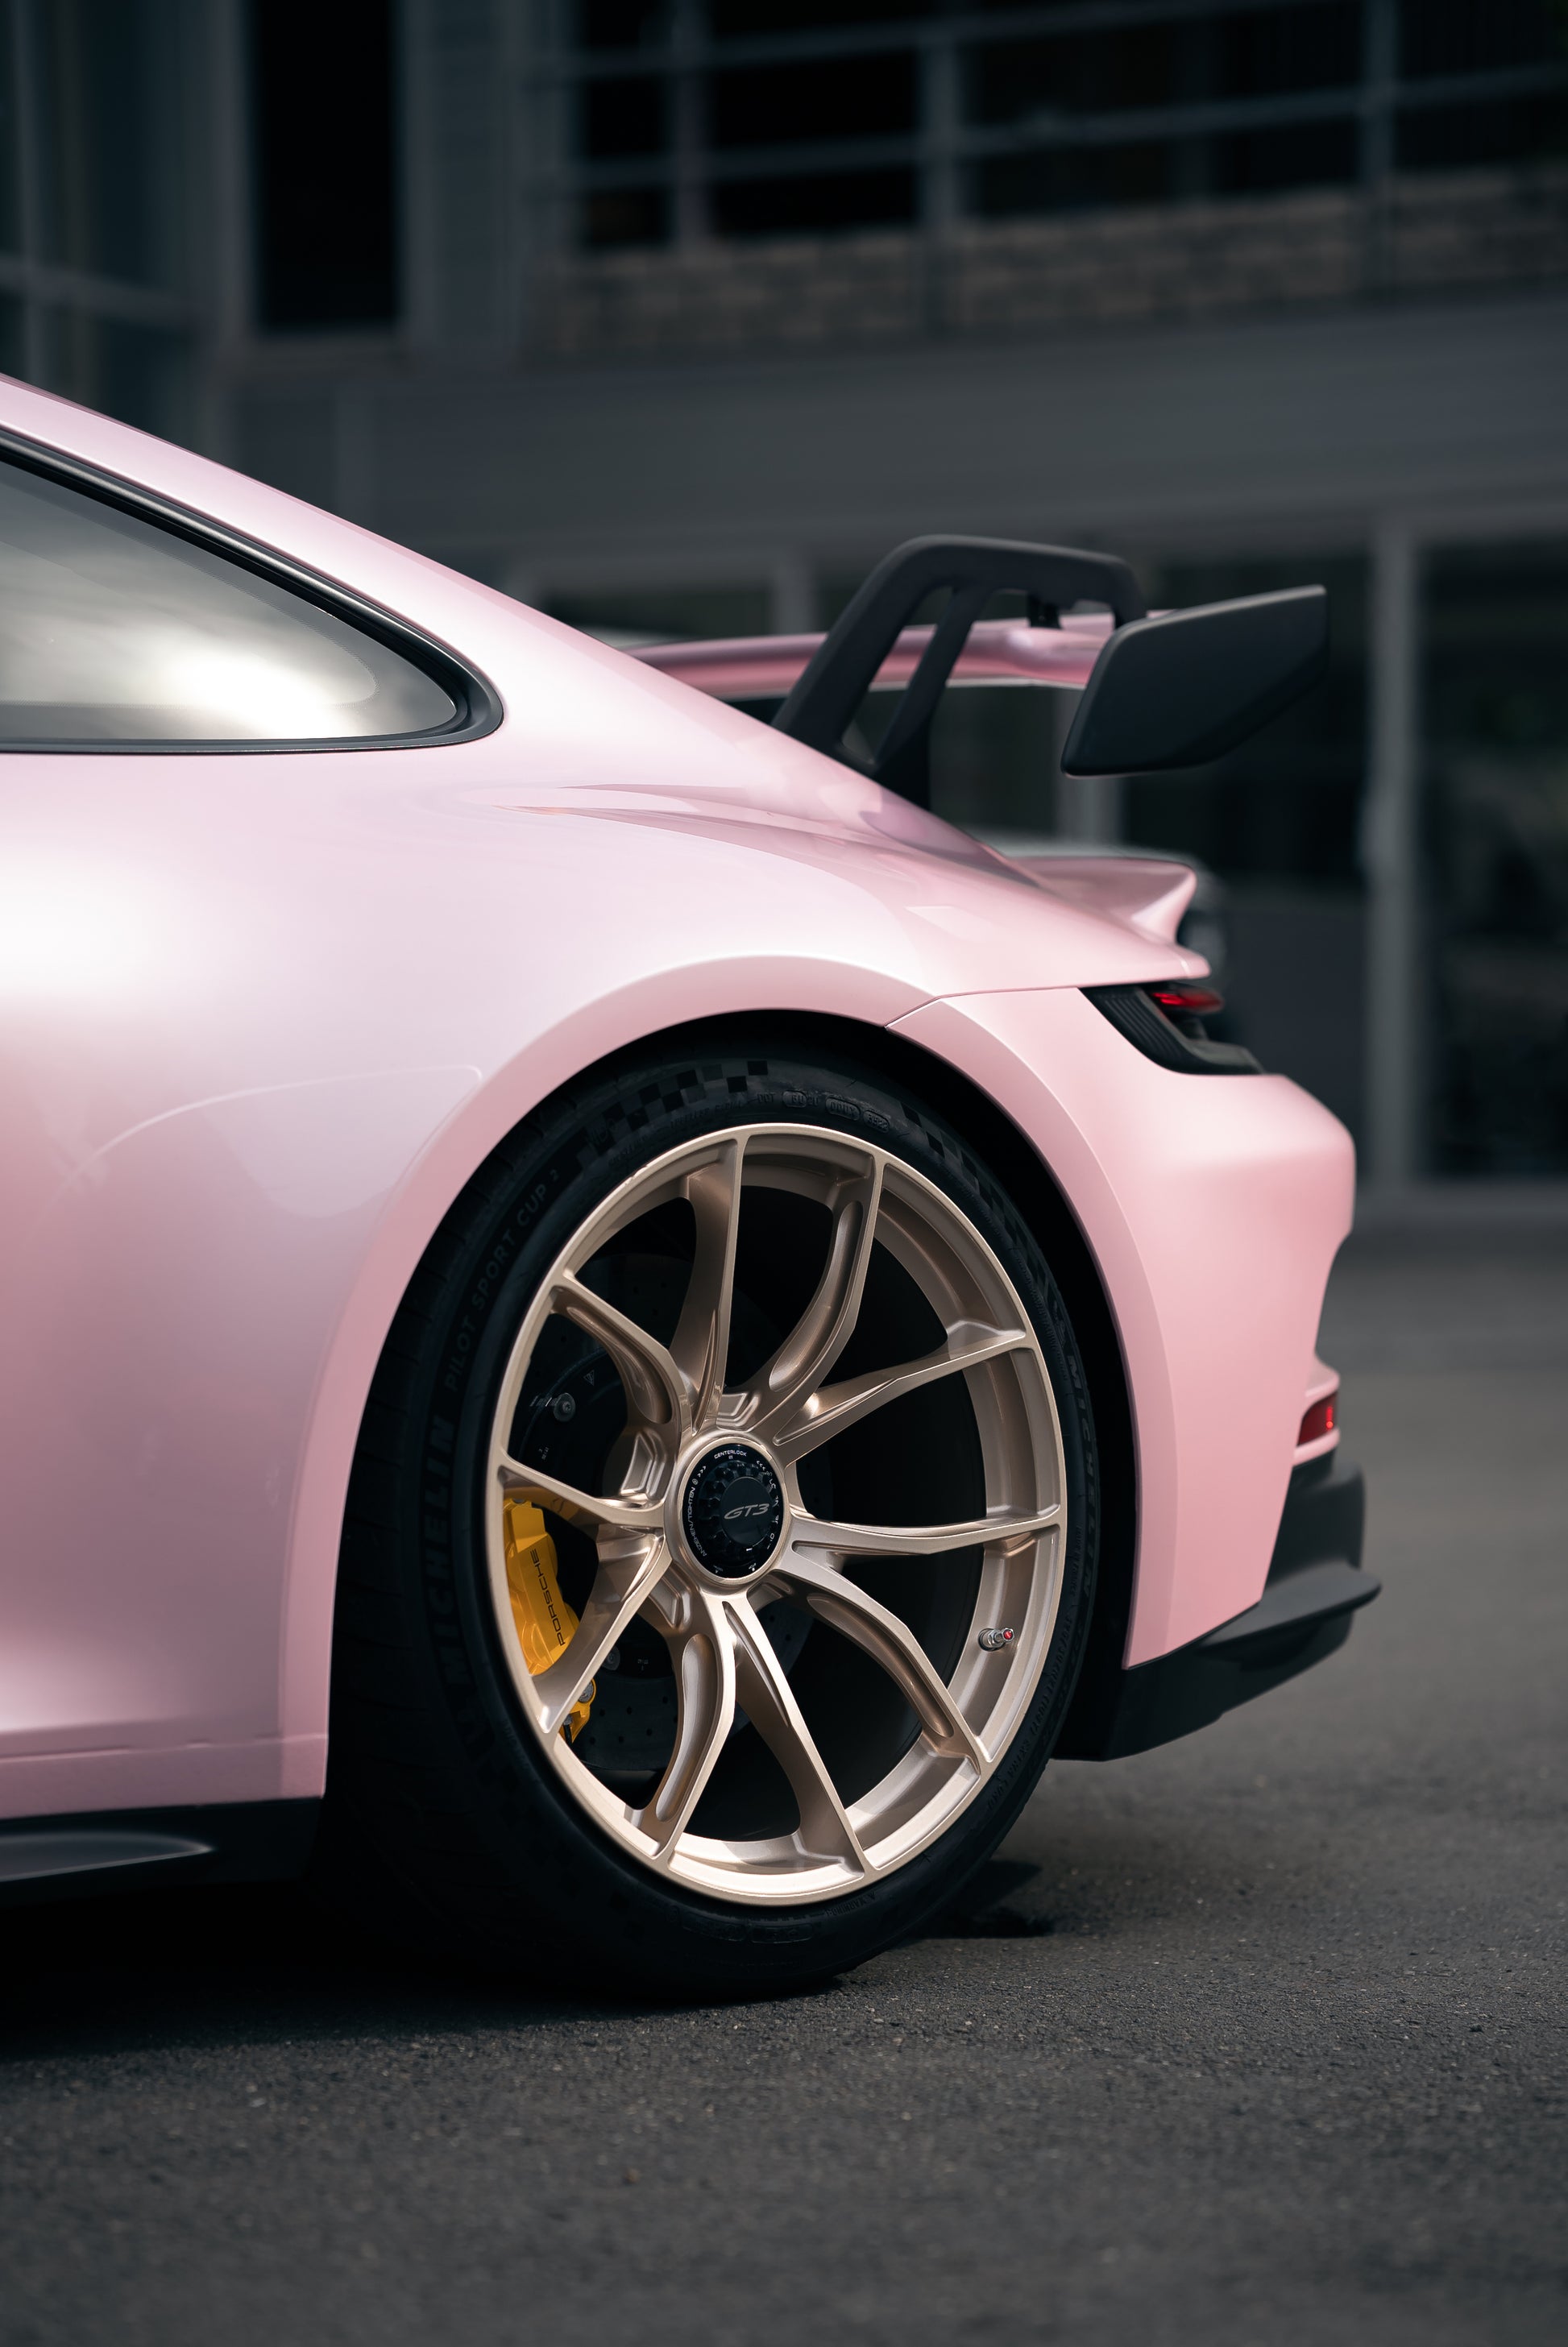 Side view of a Pink Porsche GT3 with an IPE MFR-01 Magnesium wheel fitted